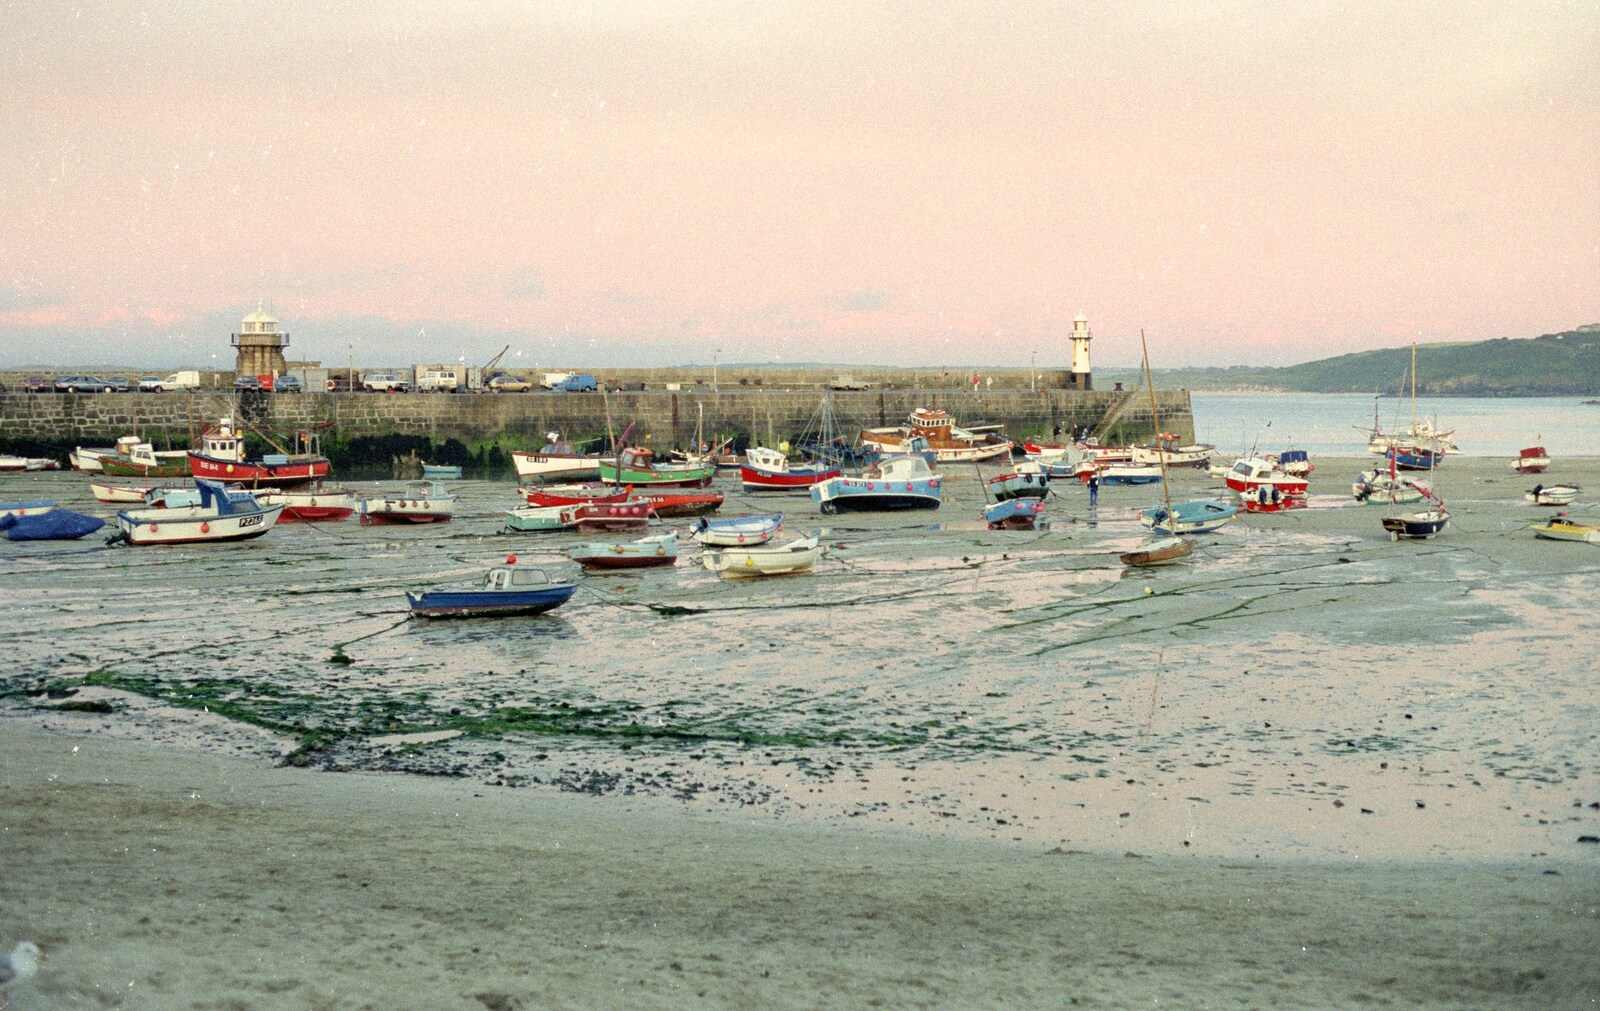 St. Ives harbour from Uni: An End-of-it-all Trip to Land's End, Cornwall - 13th June 1989